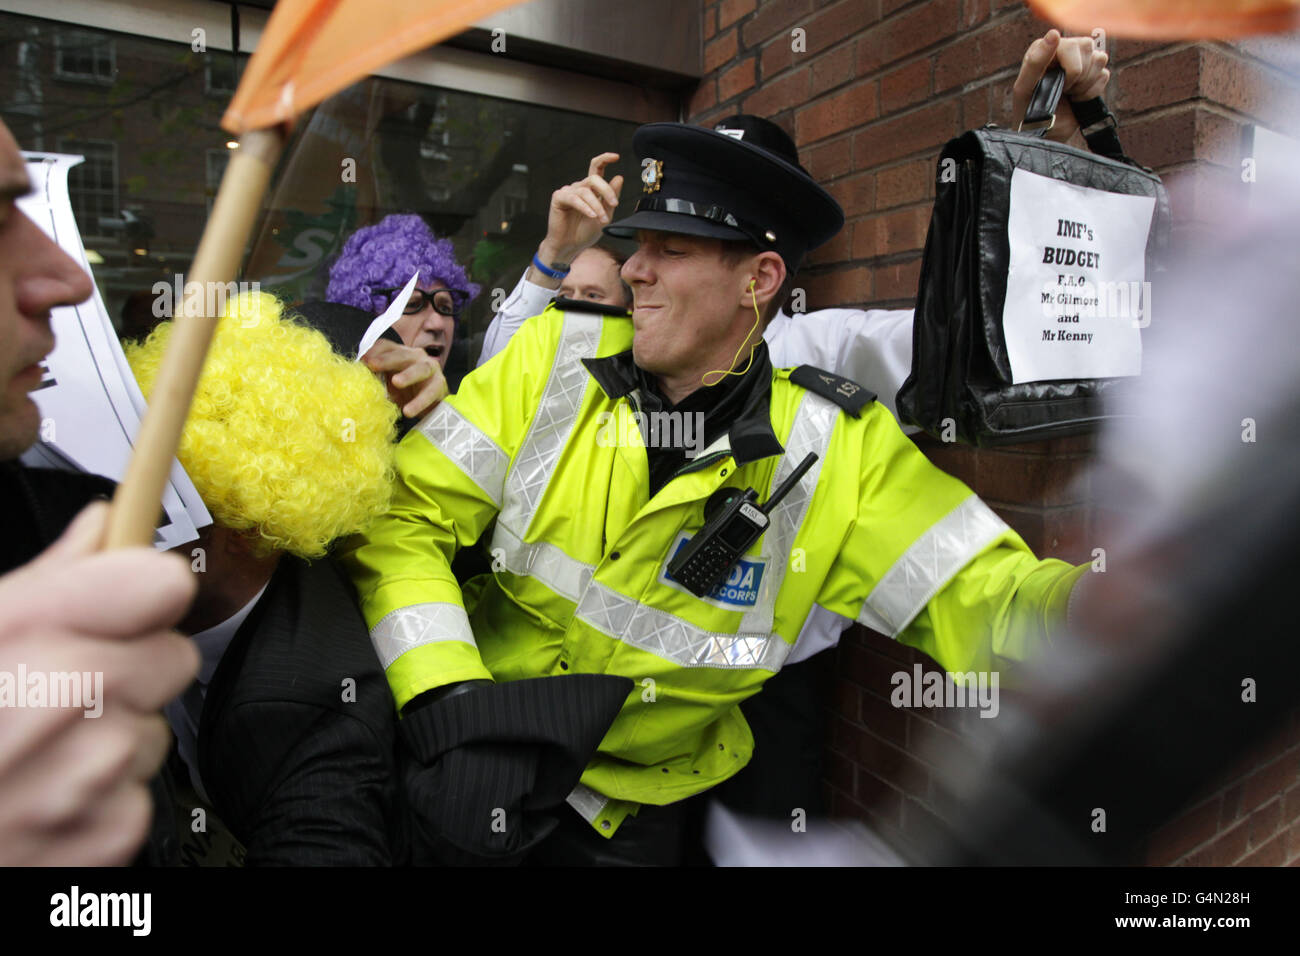 Gardai scuffle with Sinn Fein activists mimicking IMF officials as they picket the European Union headquarters in Dublin as Ireland marks the one year anniversary of the EU/IMF bailout loan. Stock Photo